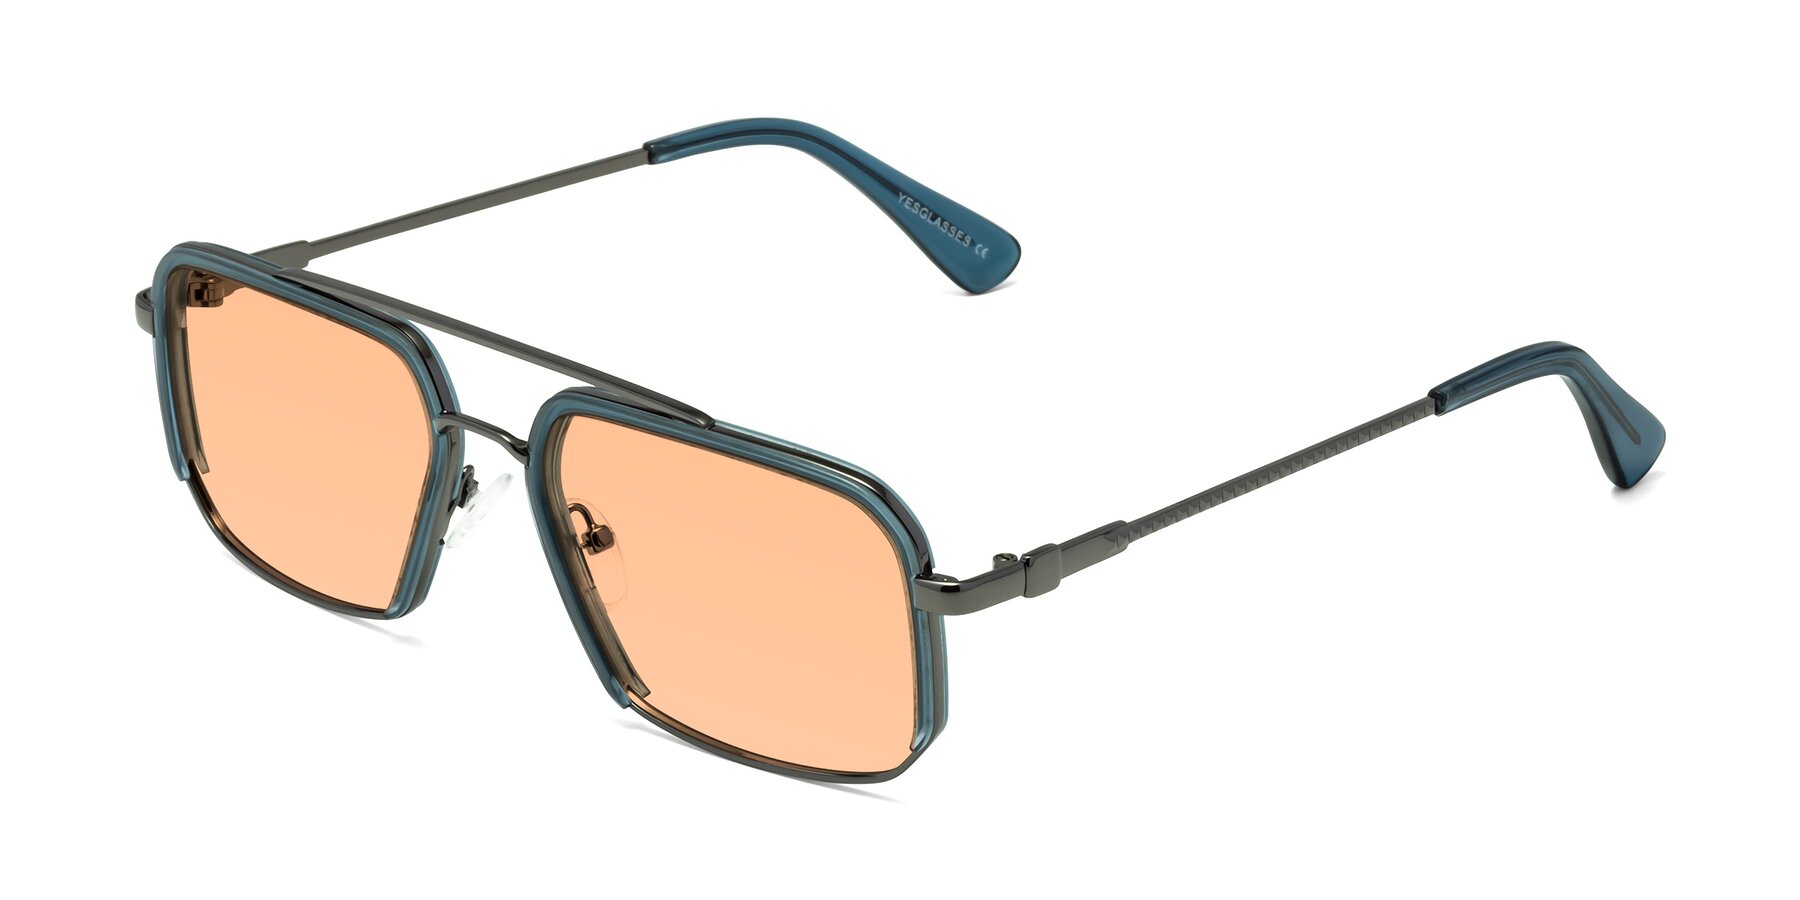 Angle of Dechter in Teal-Gunmetal with Light Orange Tinted Lenses